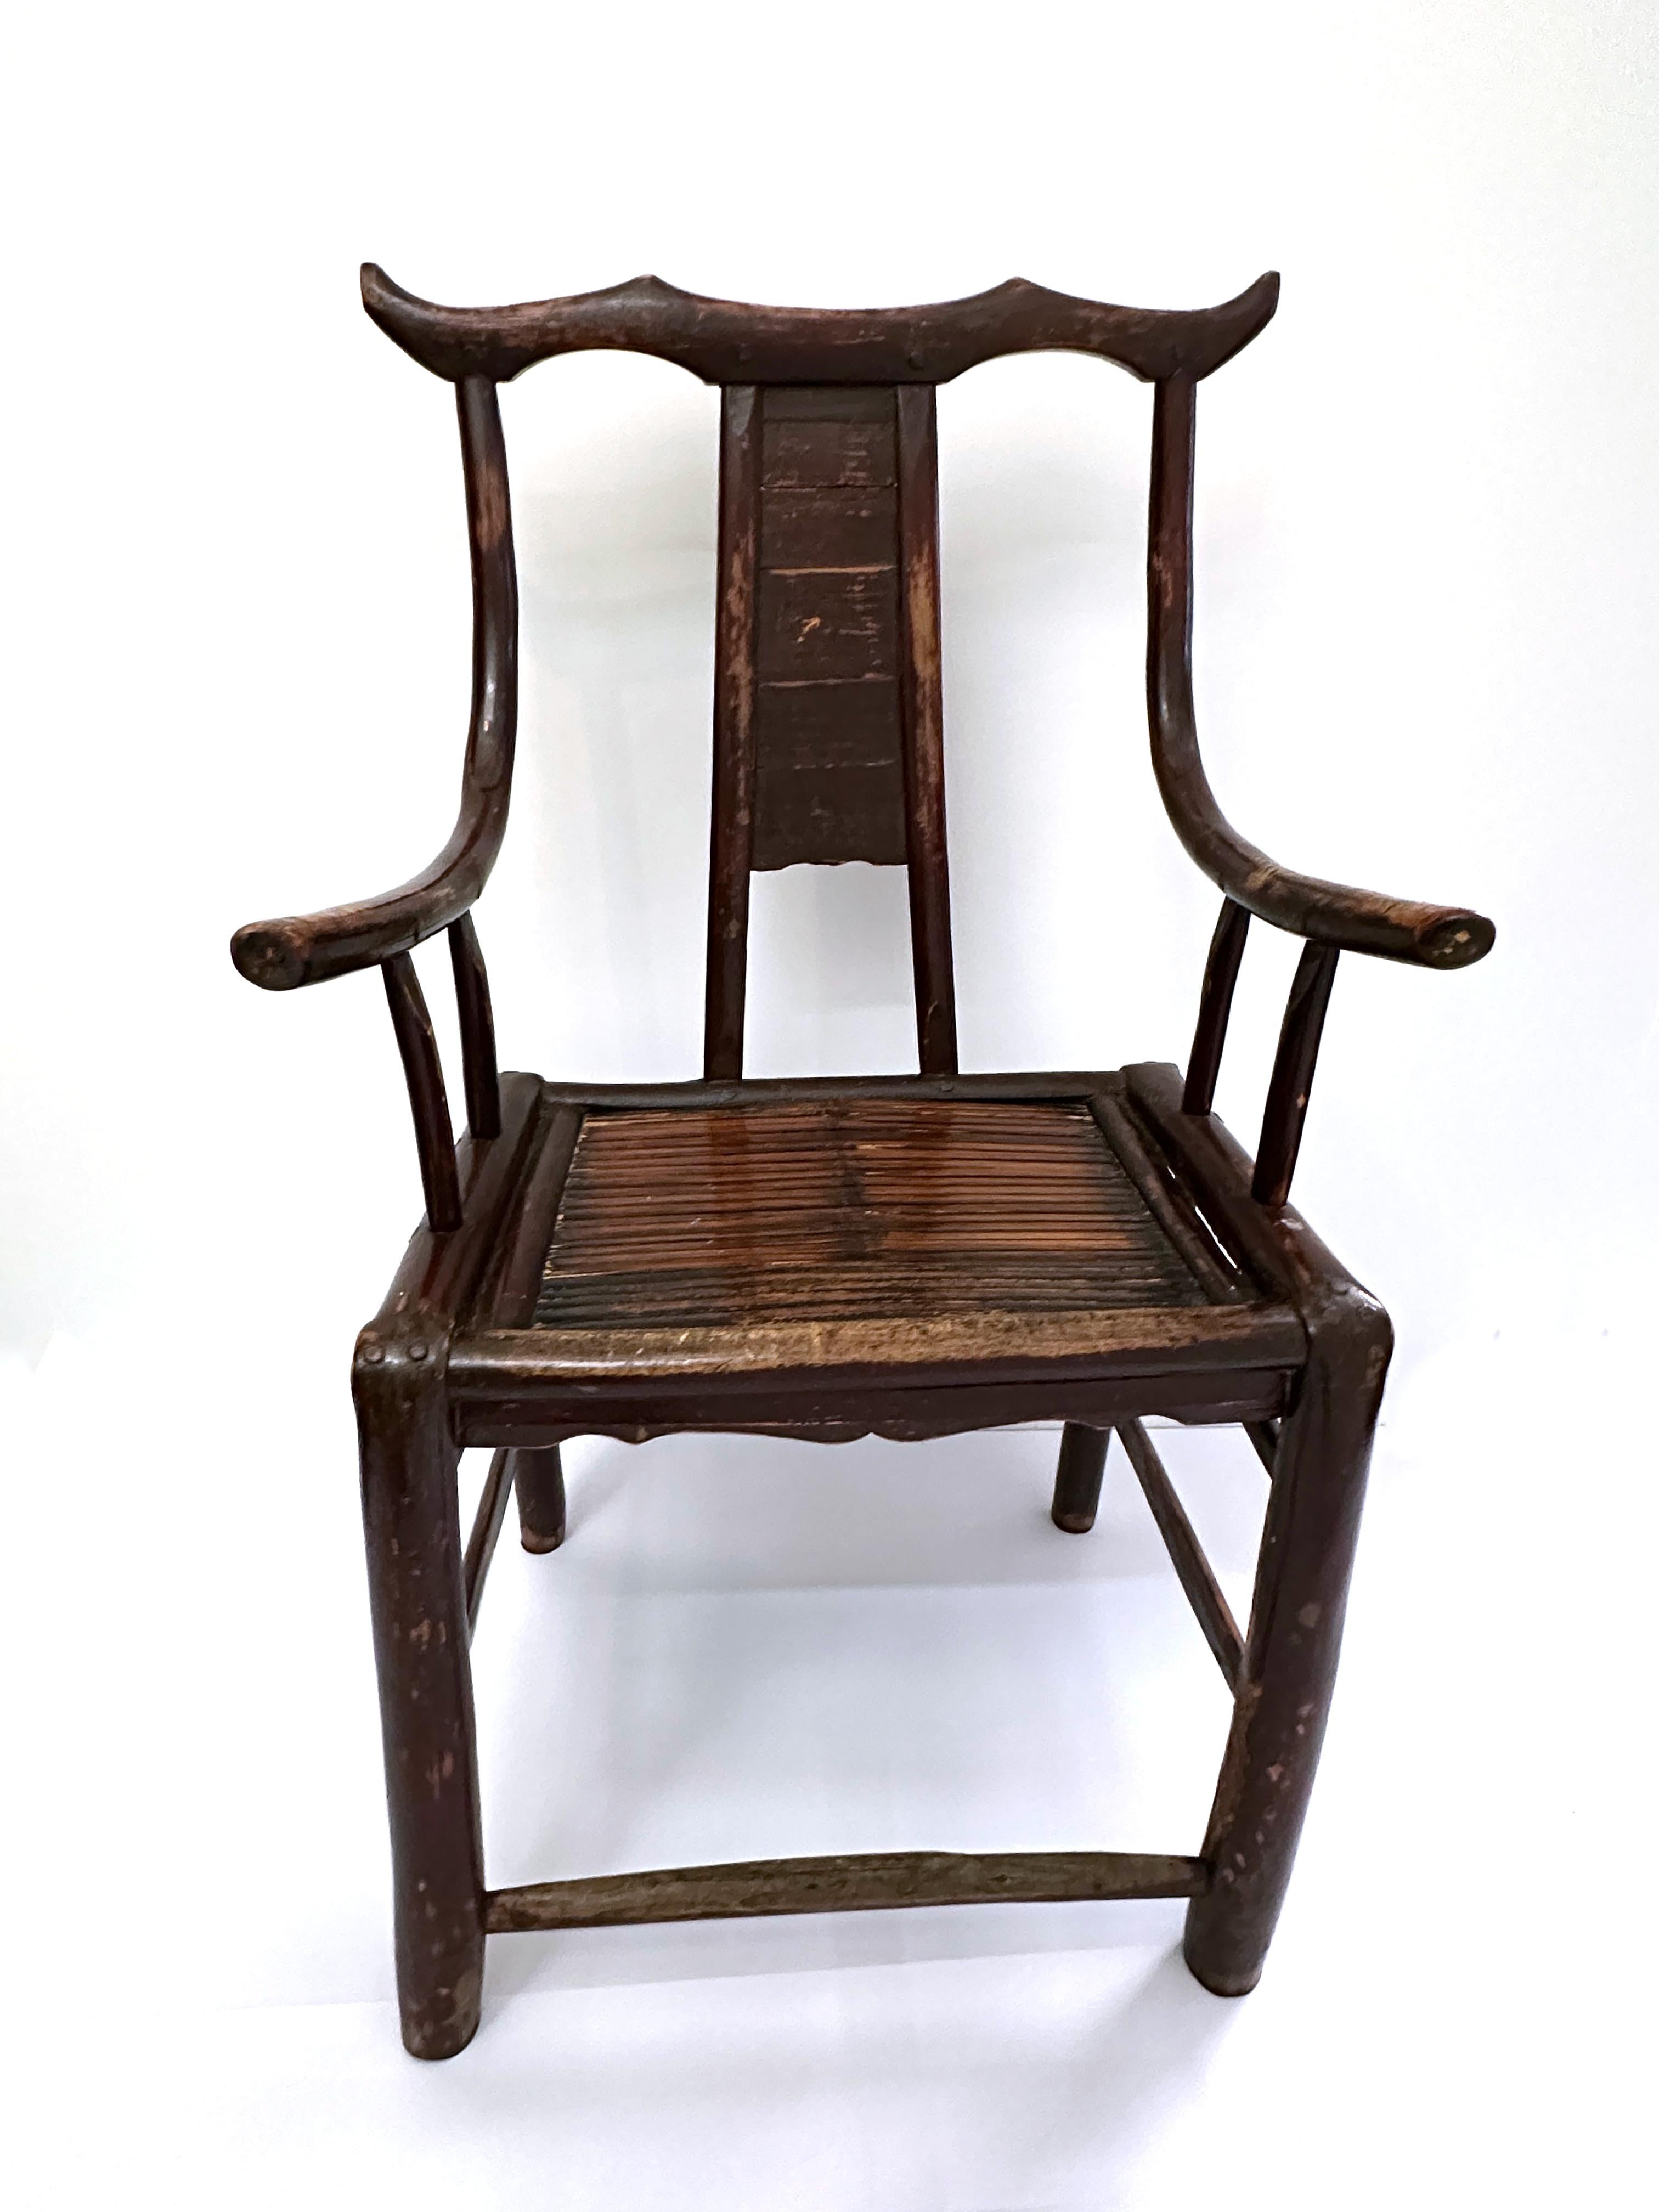 Antique Chinese hand carved wood armchairs with original aged finish and bamboo seat. High back armchairs with a simple yet elegant Ming style. Natural Patina. Circa 1800s.

Property from esteemed interior designer Juan Montoya. Juan Montoya is one